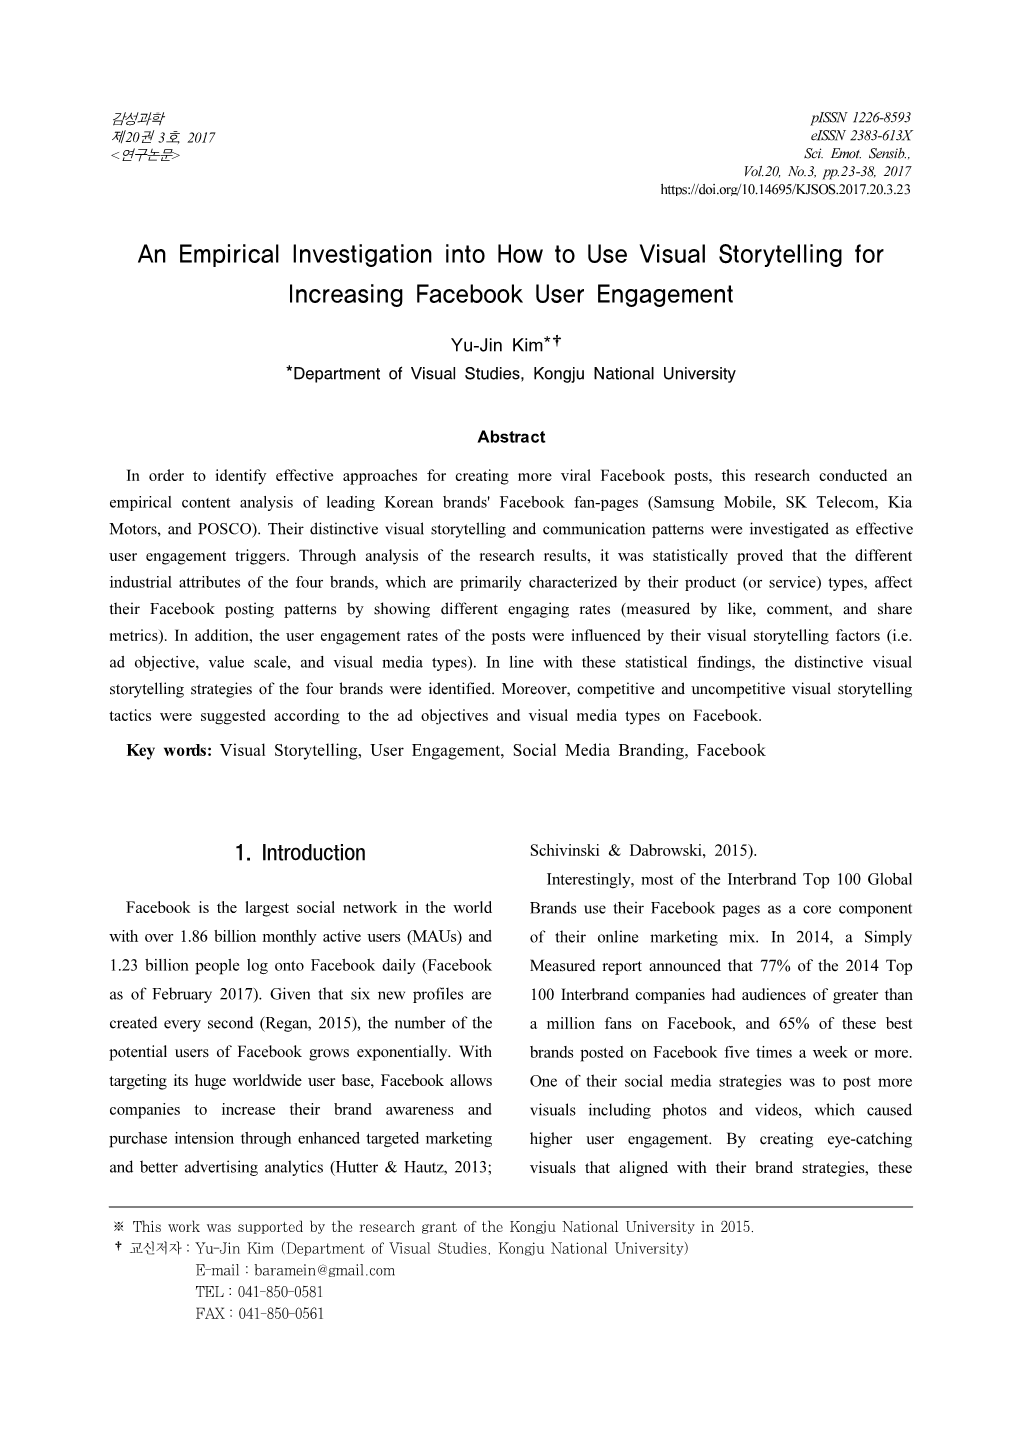 An Empirical Investigation Into How to Use Visual Storytelling for Increasing Facebook User Engagement